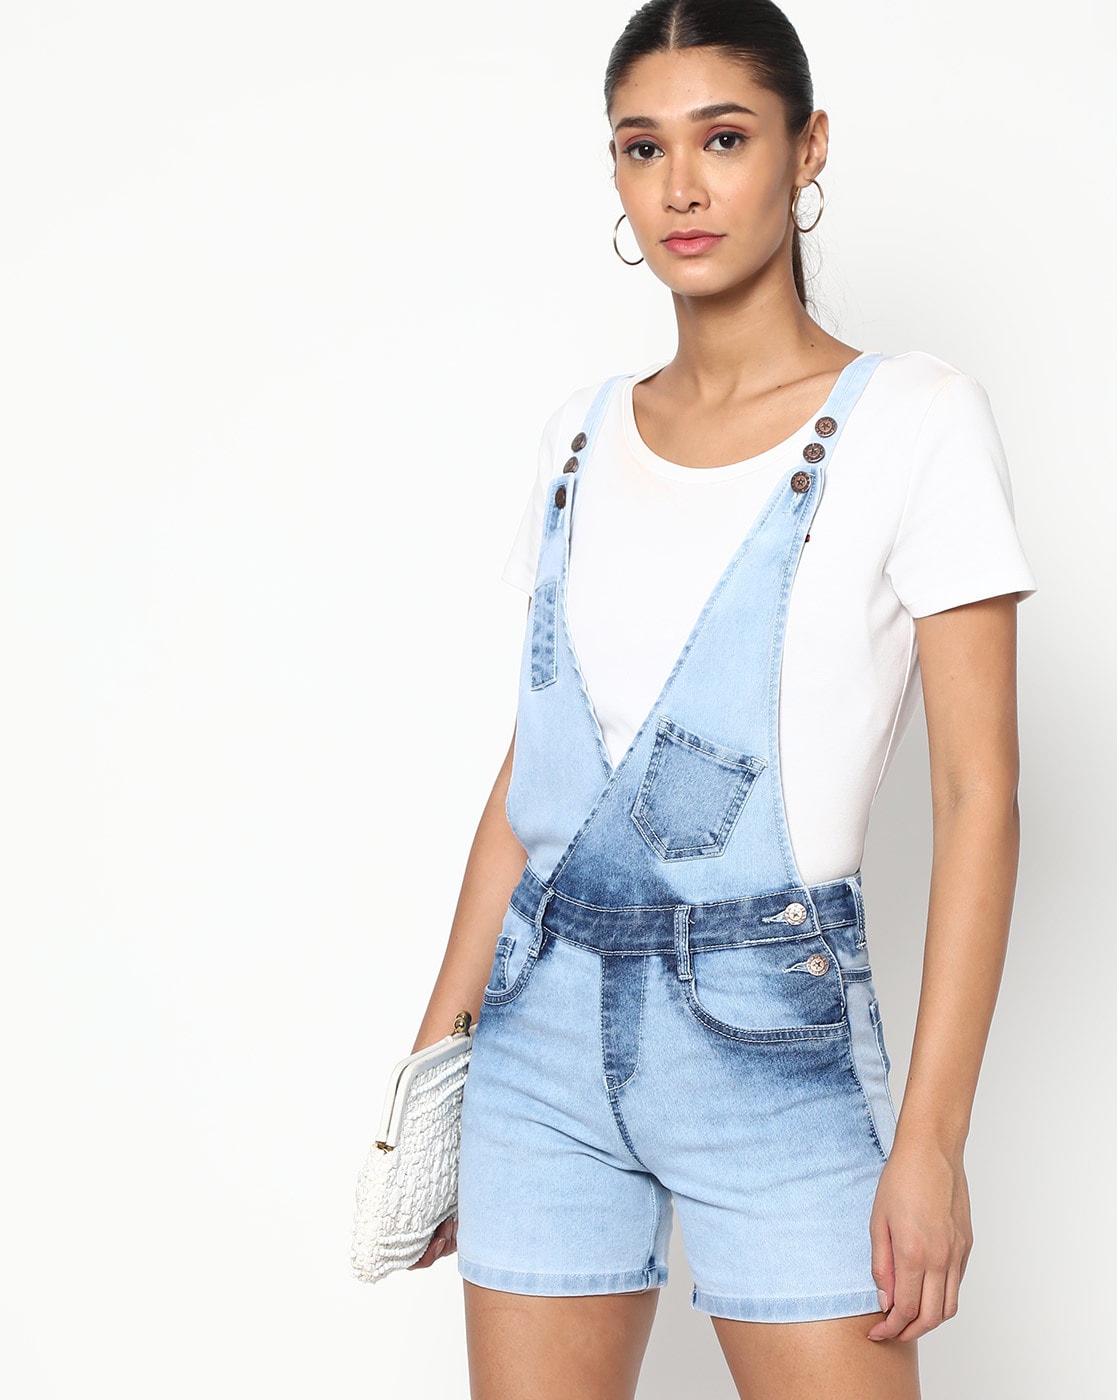 Buy Superdry Vintage Dungaree Shorts at Redfynd